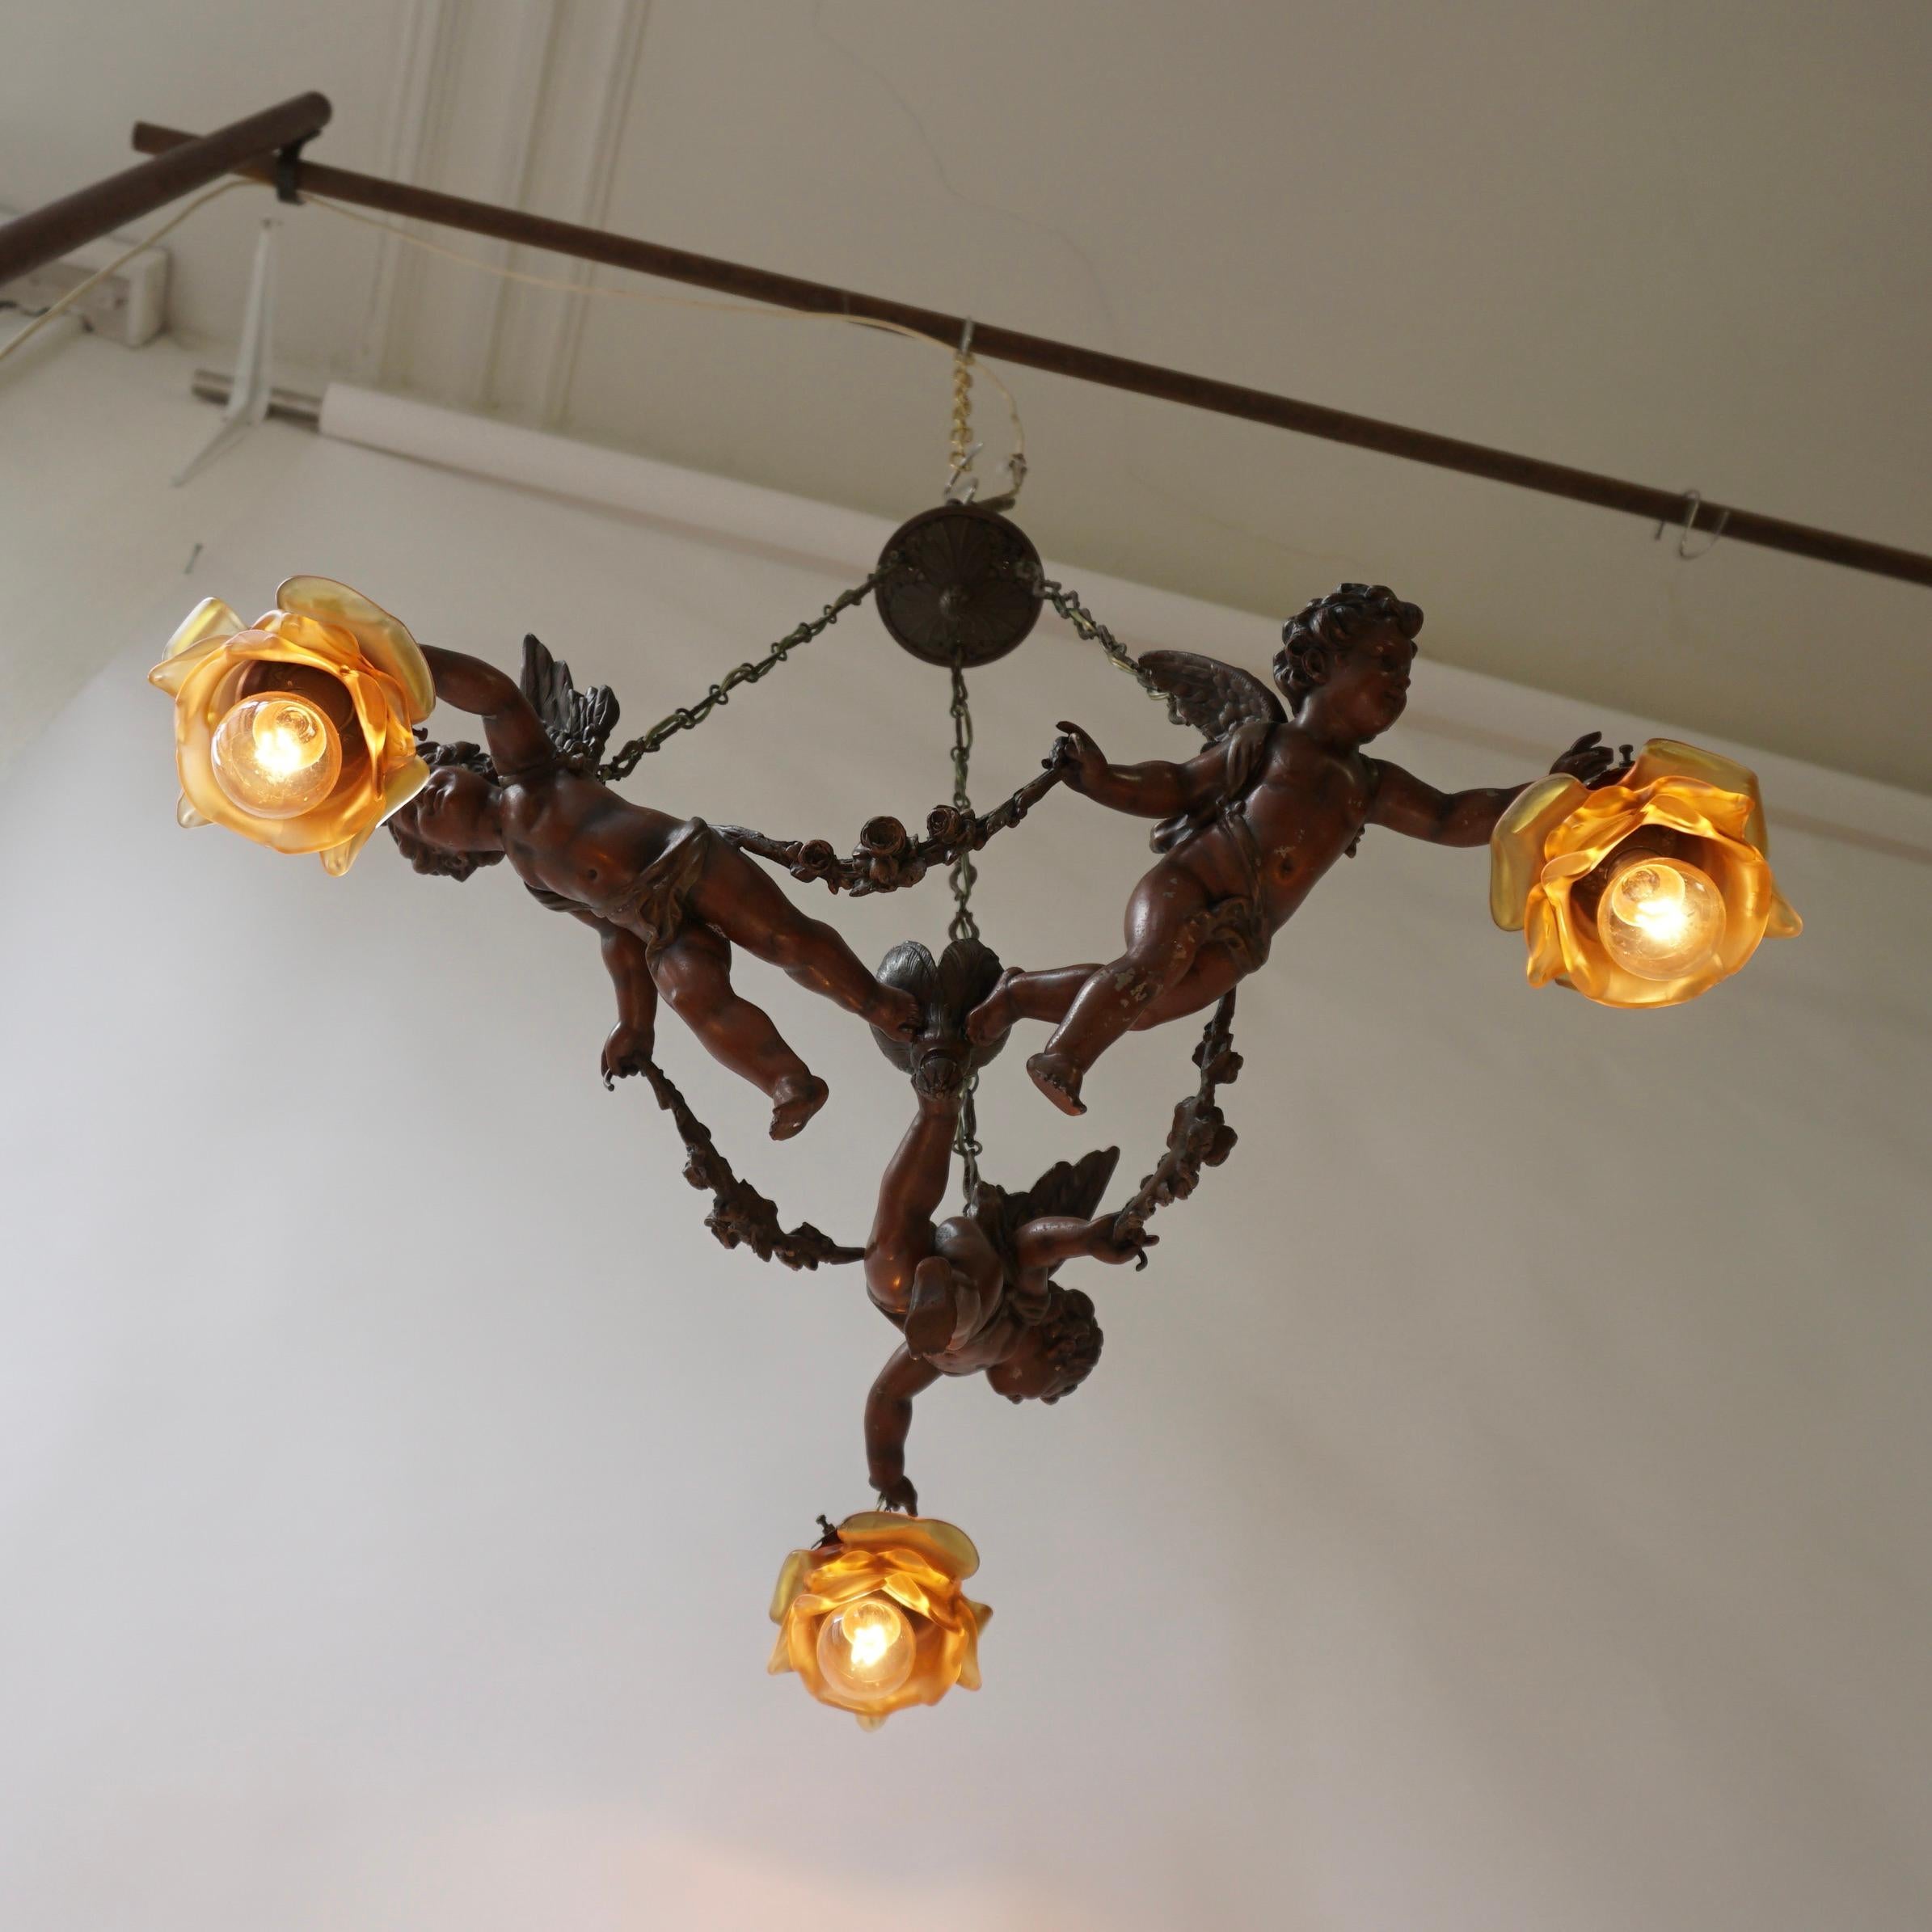 Metal French Chandelier with Three Cherubs Holding the Lights For Sale